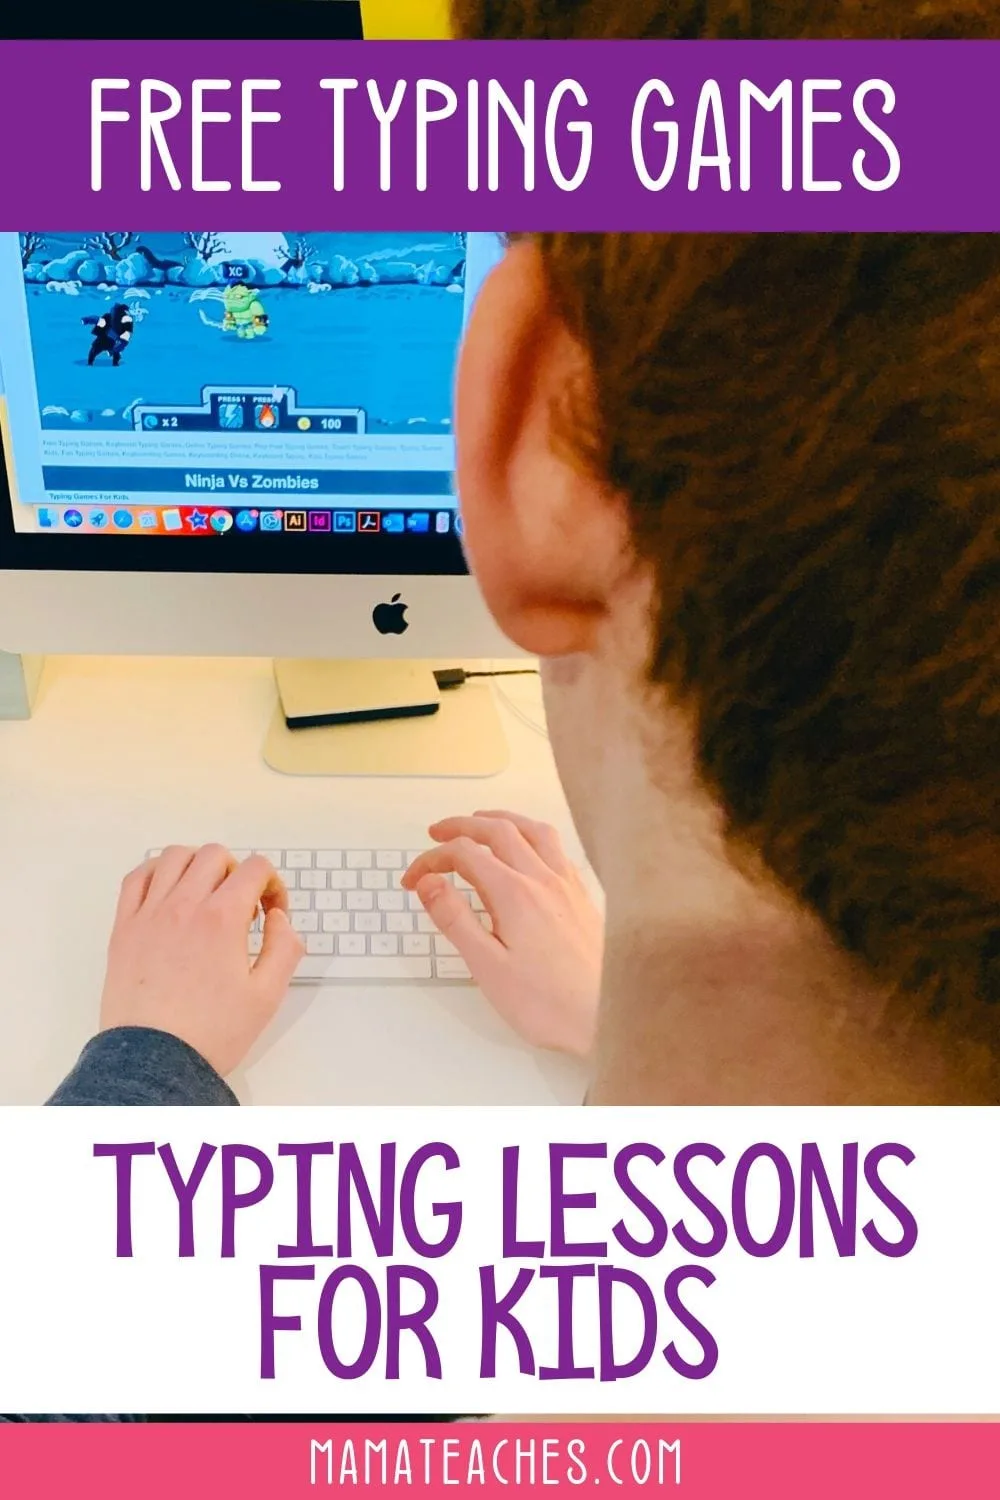 Free Typing Games - Typing Lessons for Kids - MamaTeaches.com